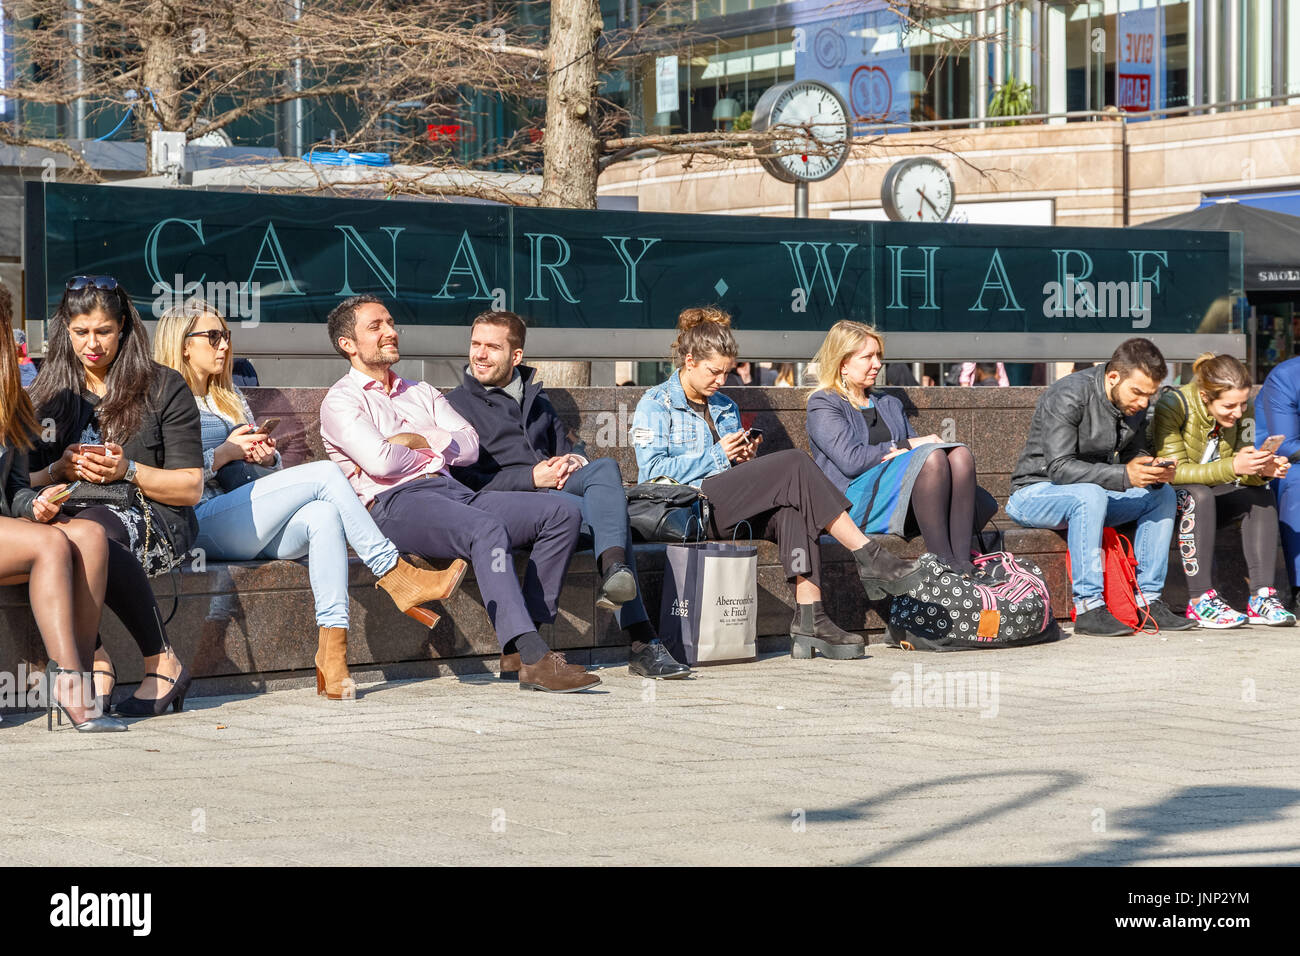 London, UK - May 10, 2017 - Outdoor space in Canary Wharf packed with people sitting and enjoying the sunny day Stock Photo